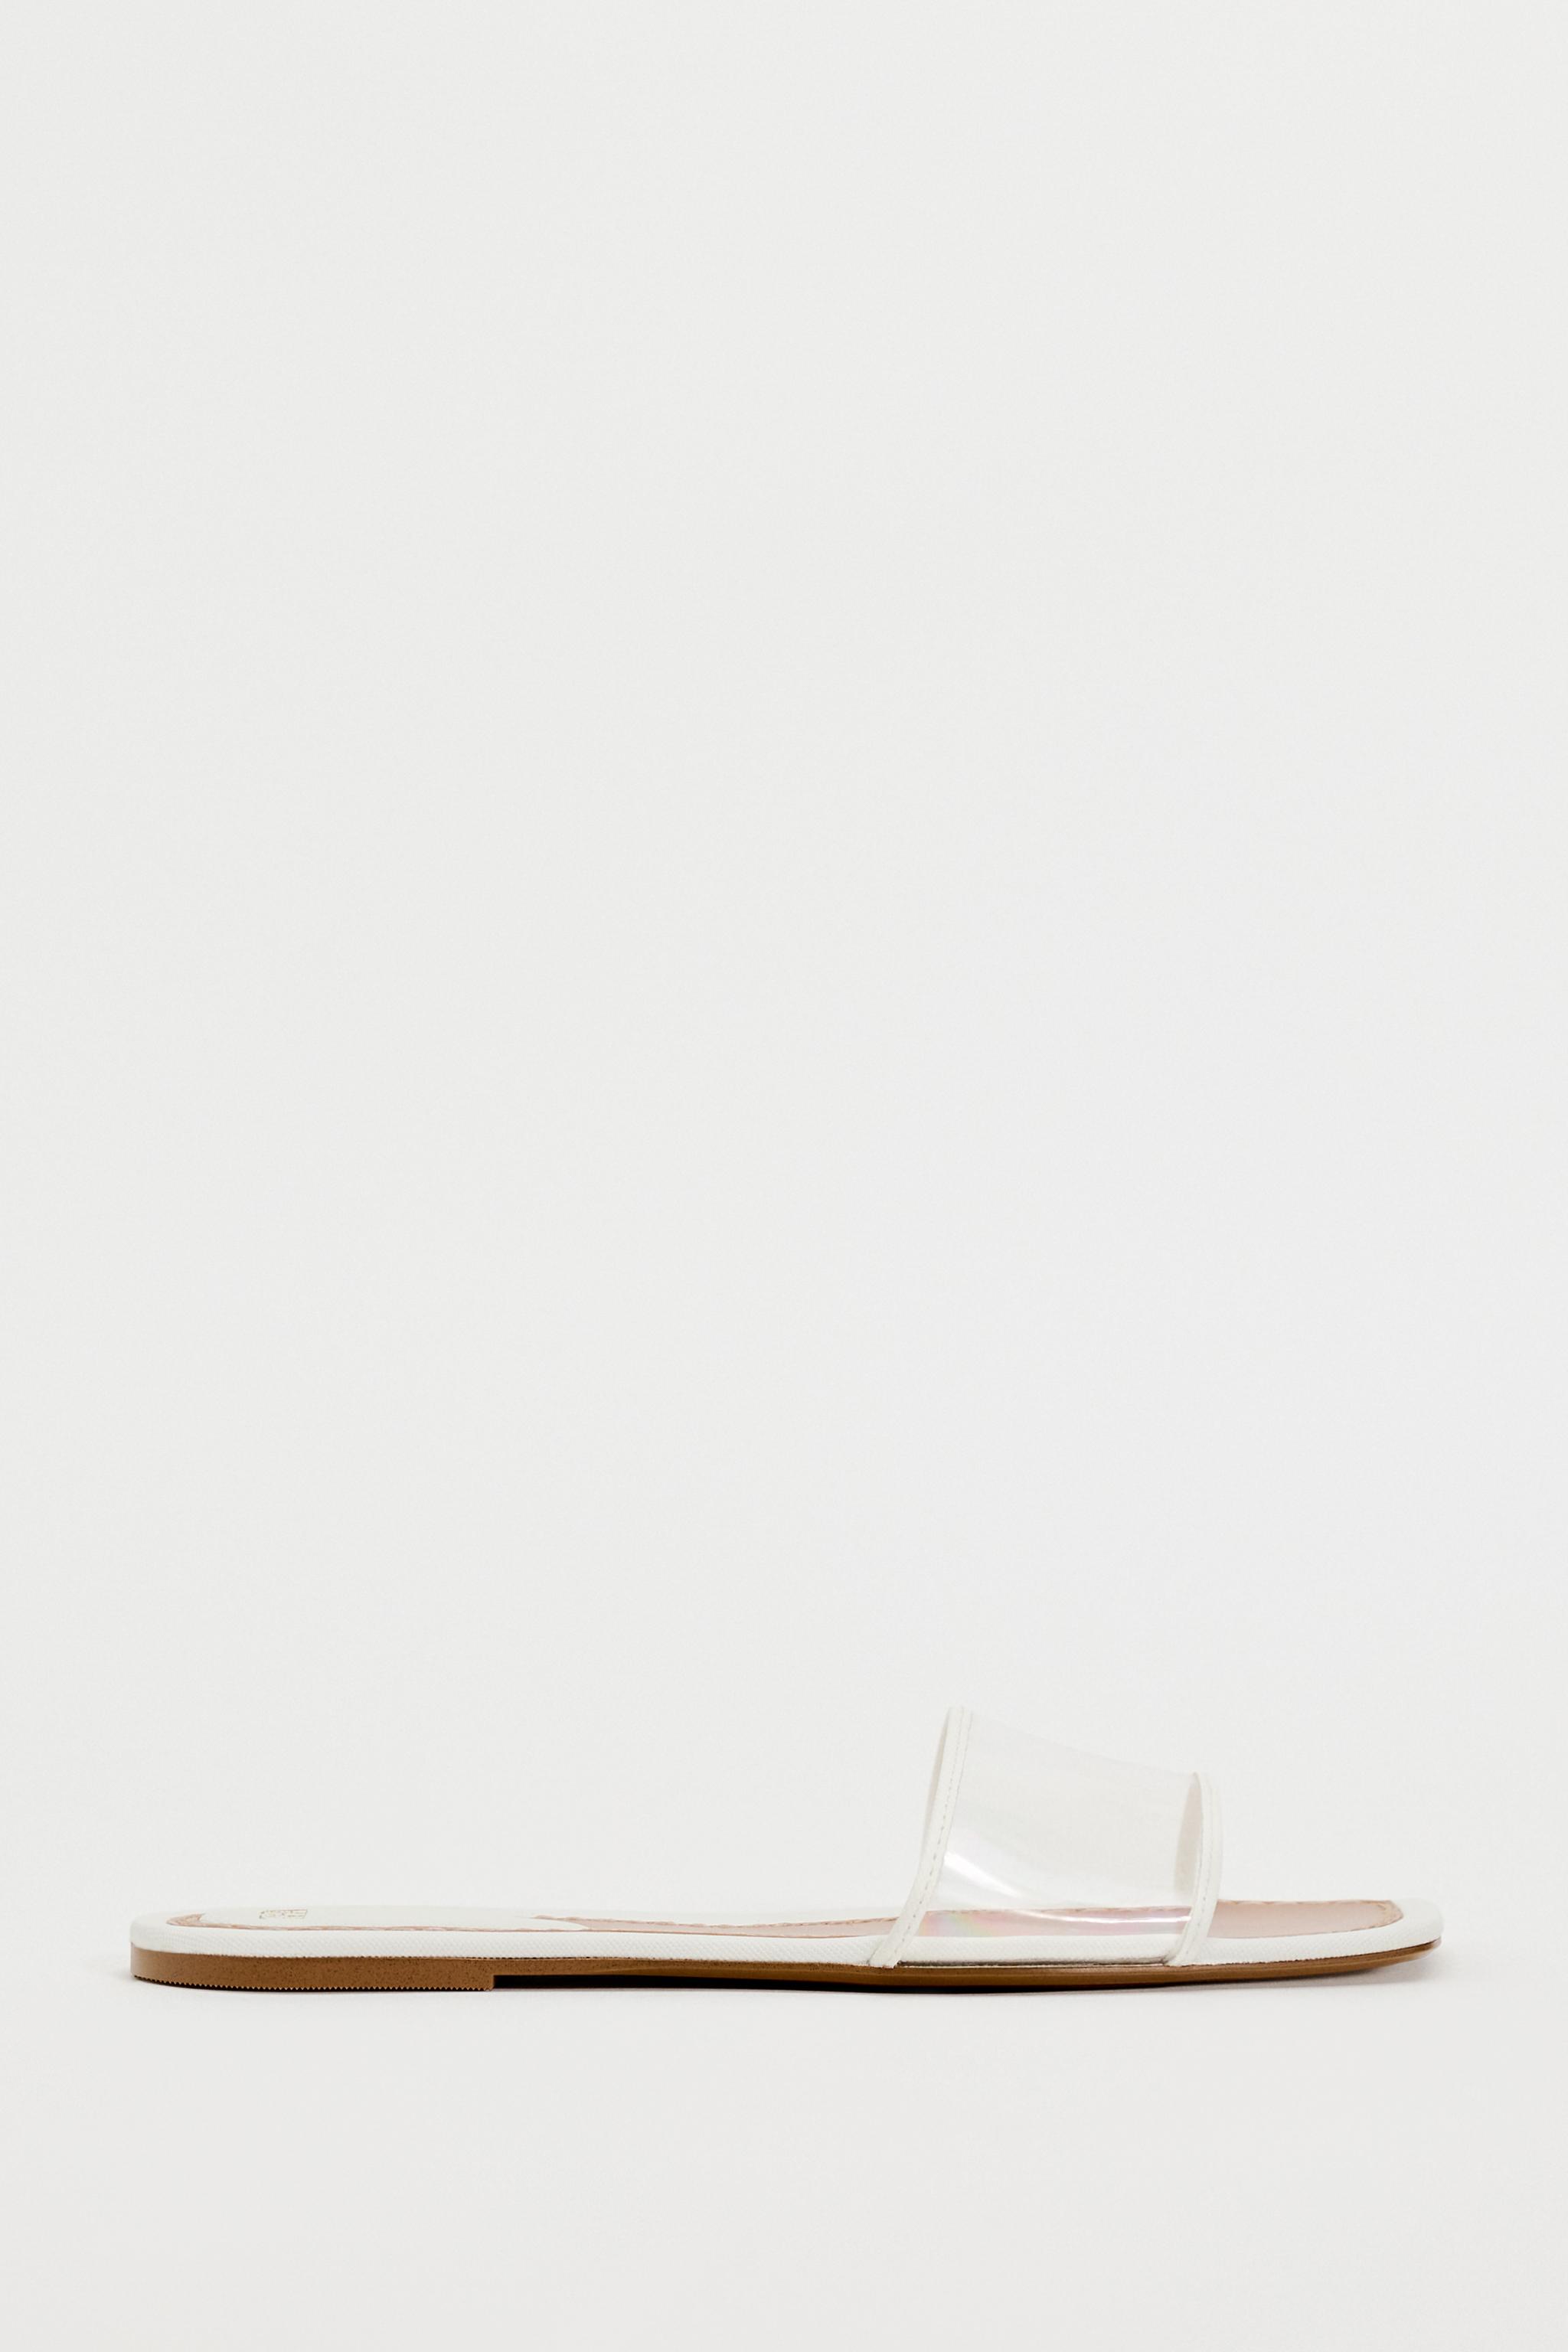 Women's Shoes | ZARA United States - Page 9